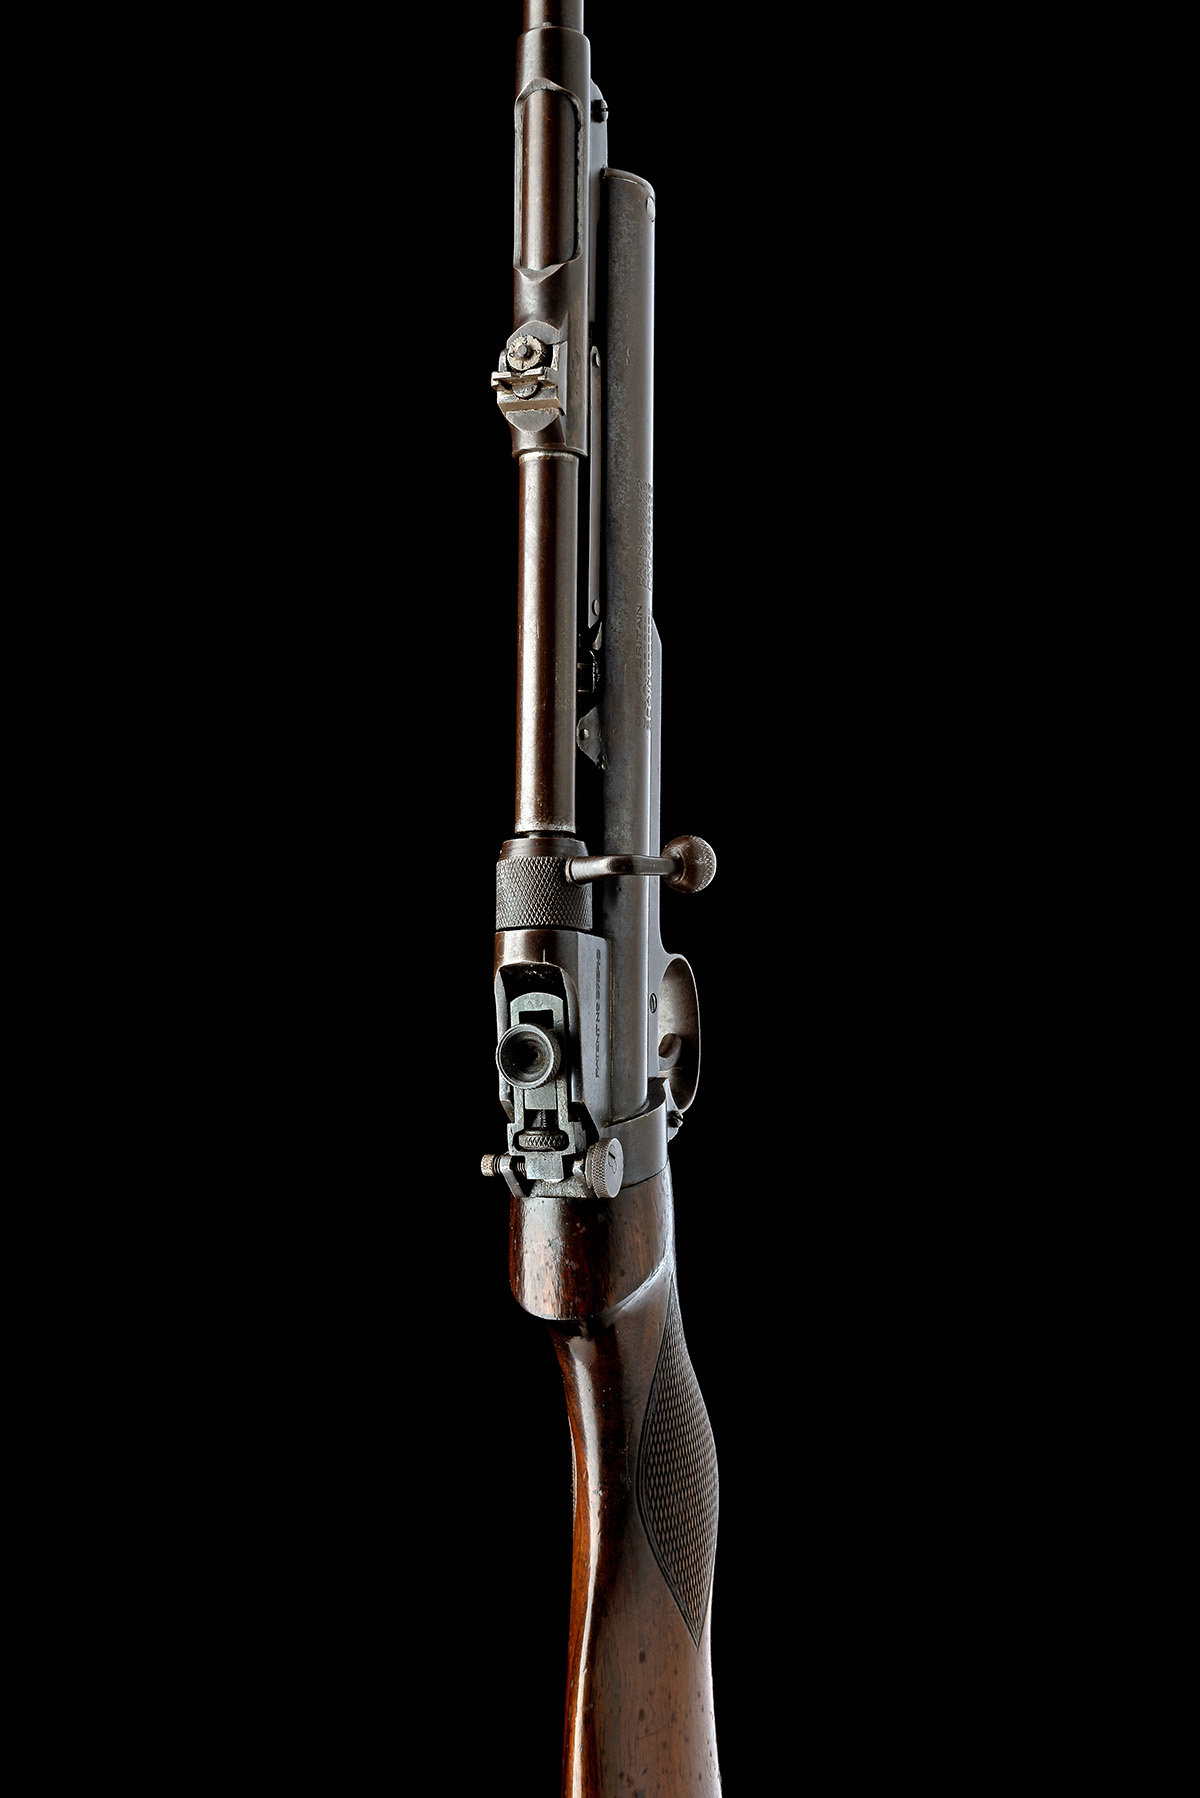 A .177 WEBLEY & SCOTT SERVICE MKII AIR-RIFLE, serial no. S4942, circa 1935, matching number 25 1/ - Image 4 of 8